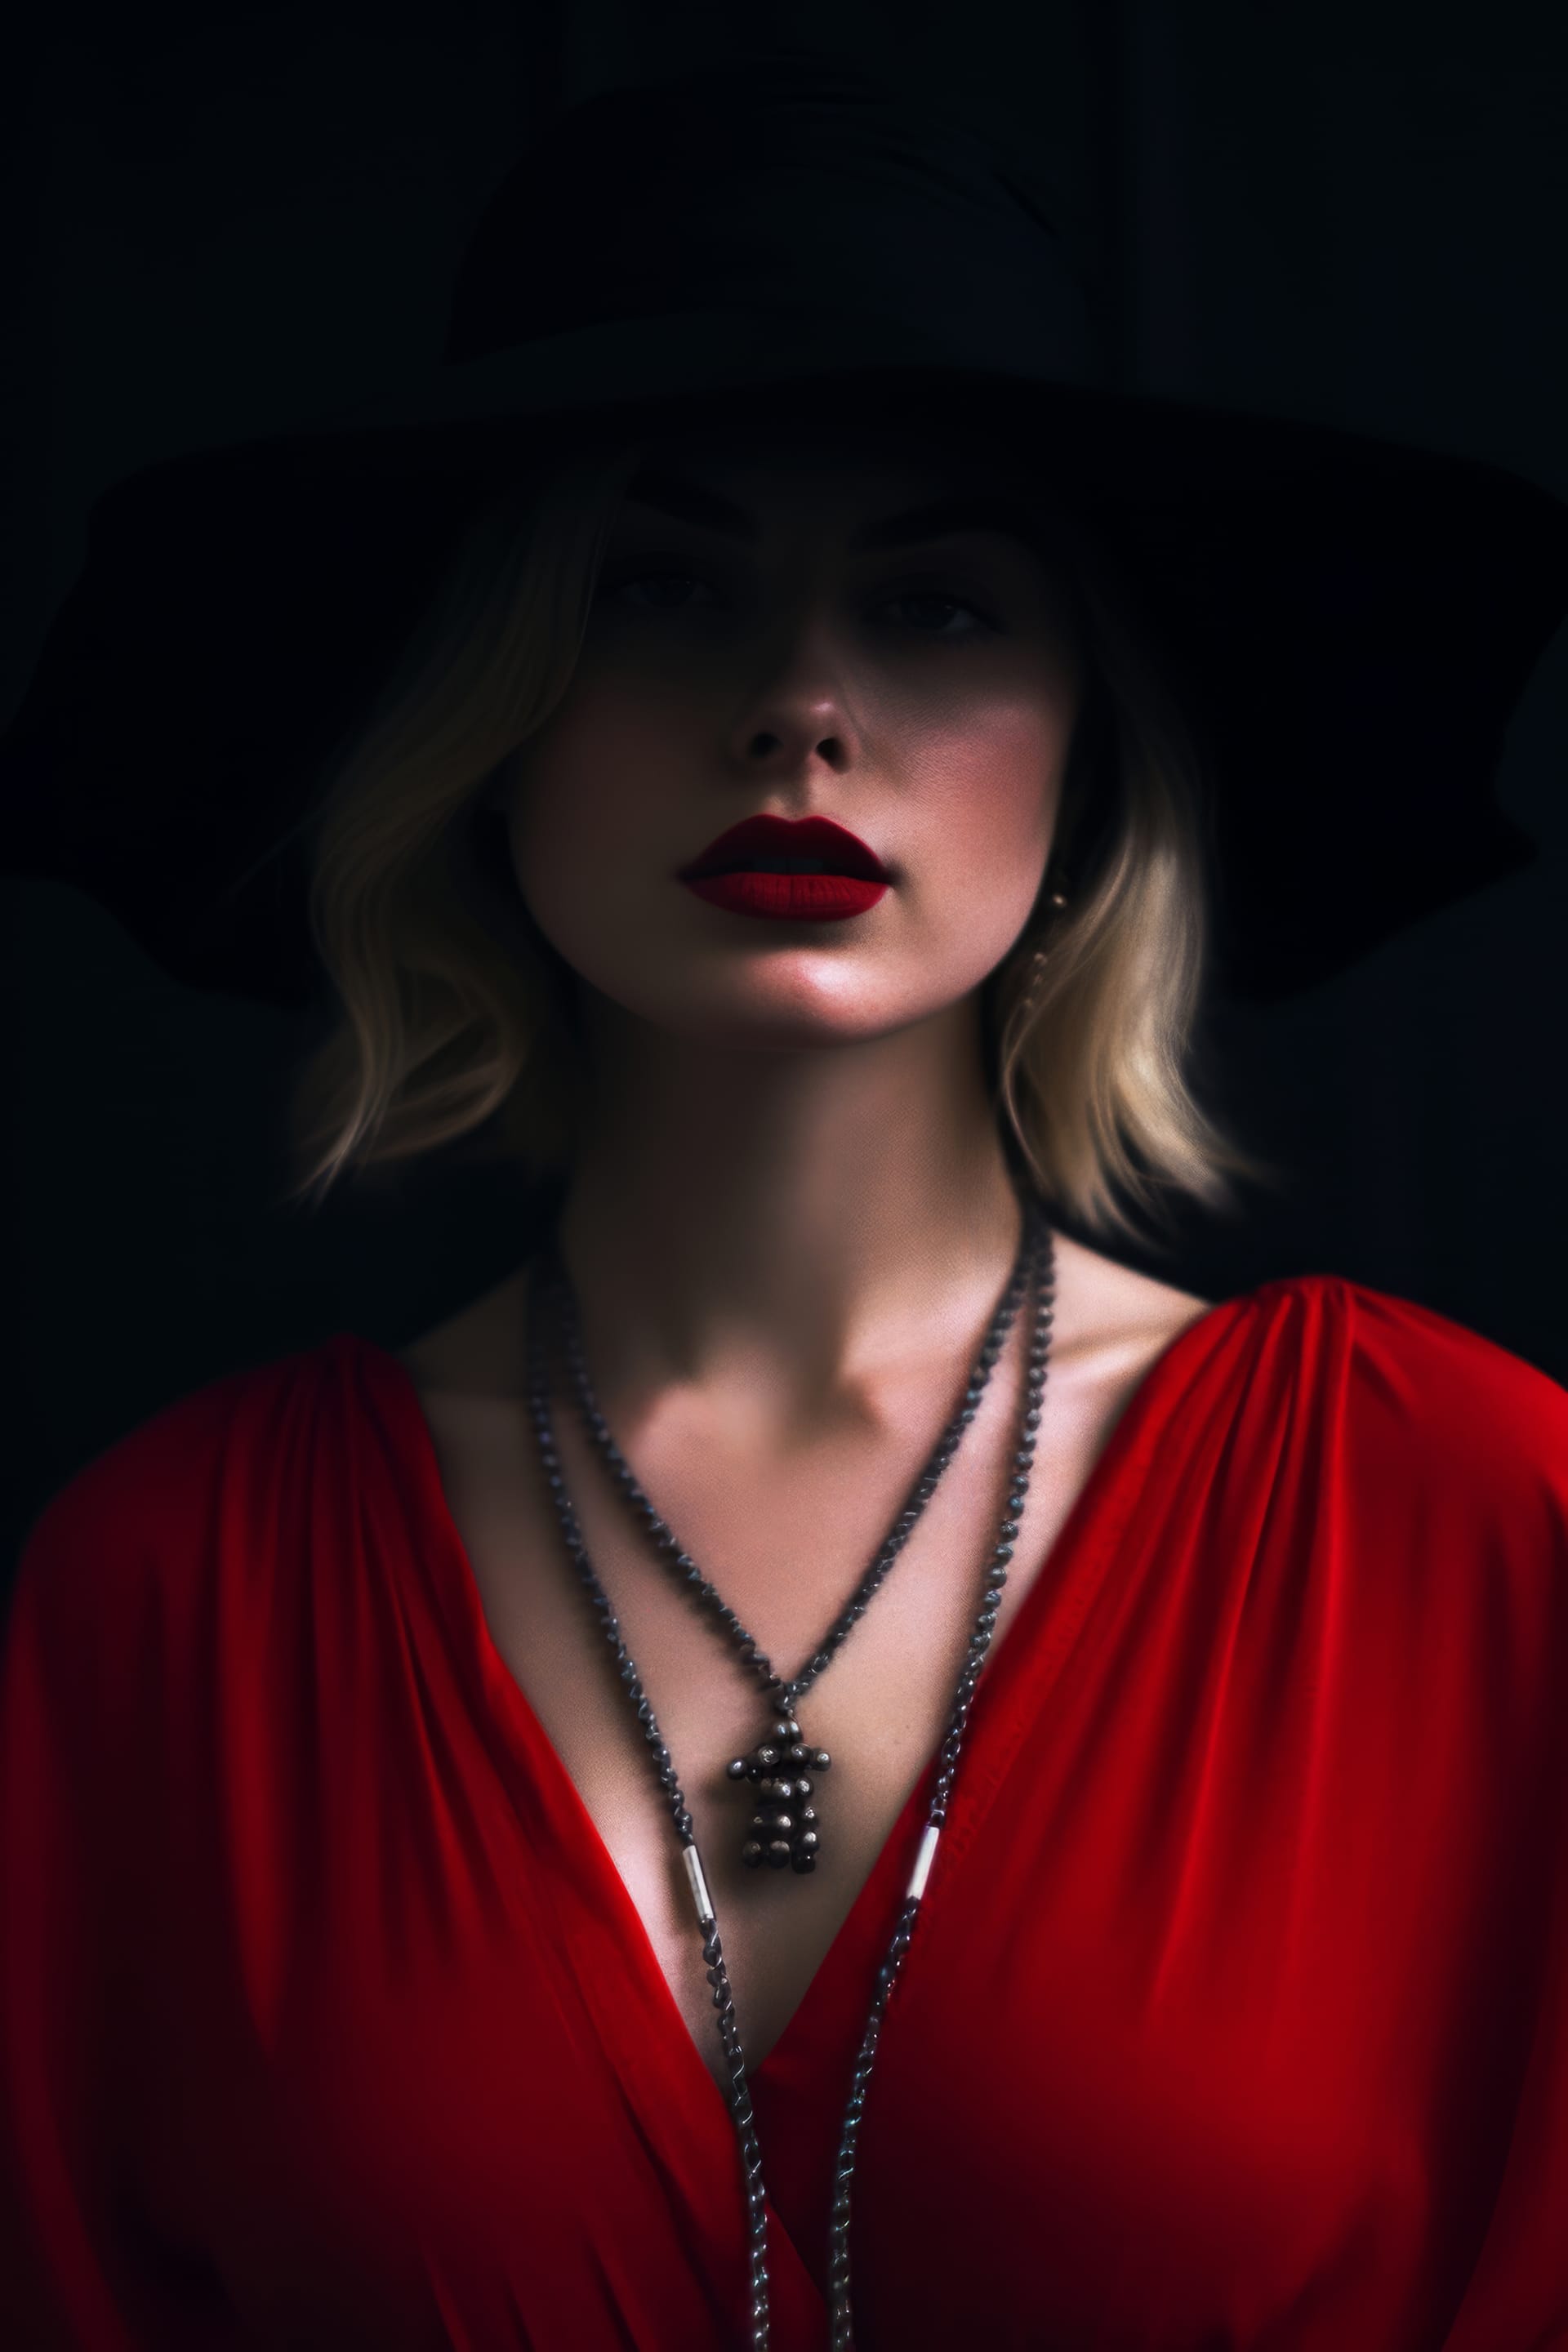 Woman red dress black hat stands front black background